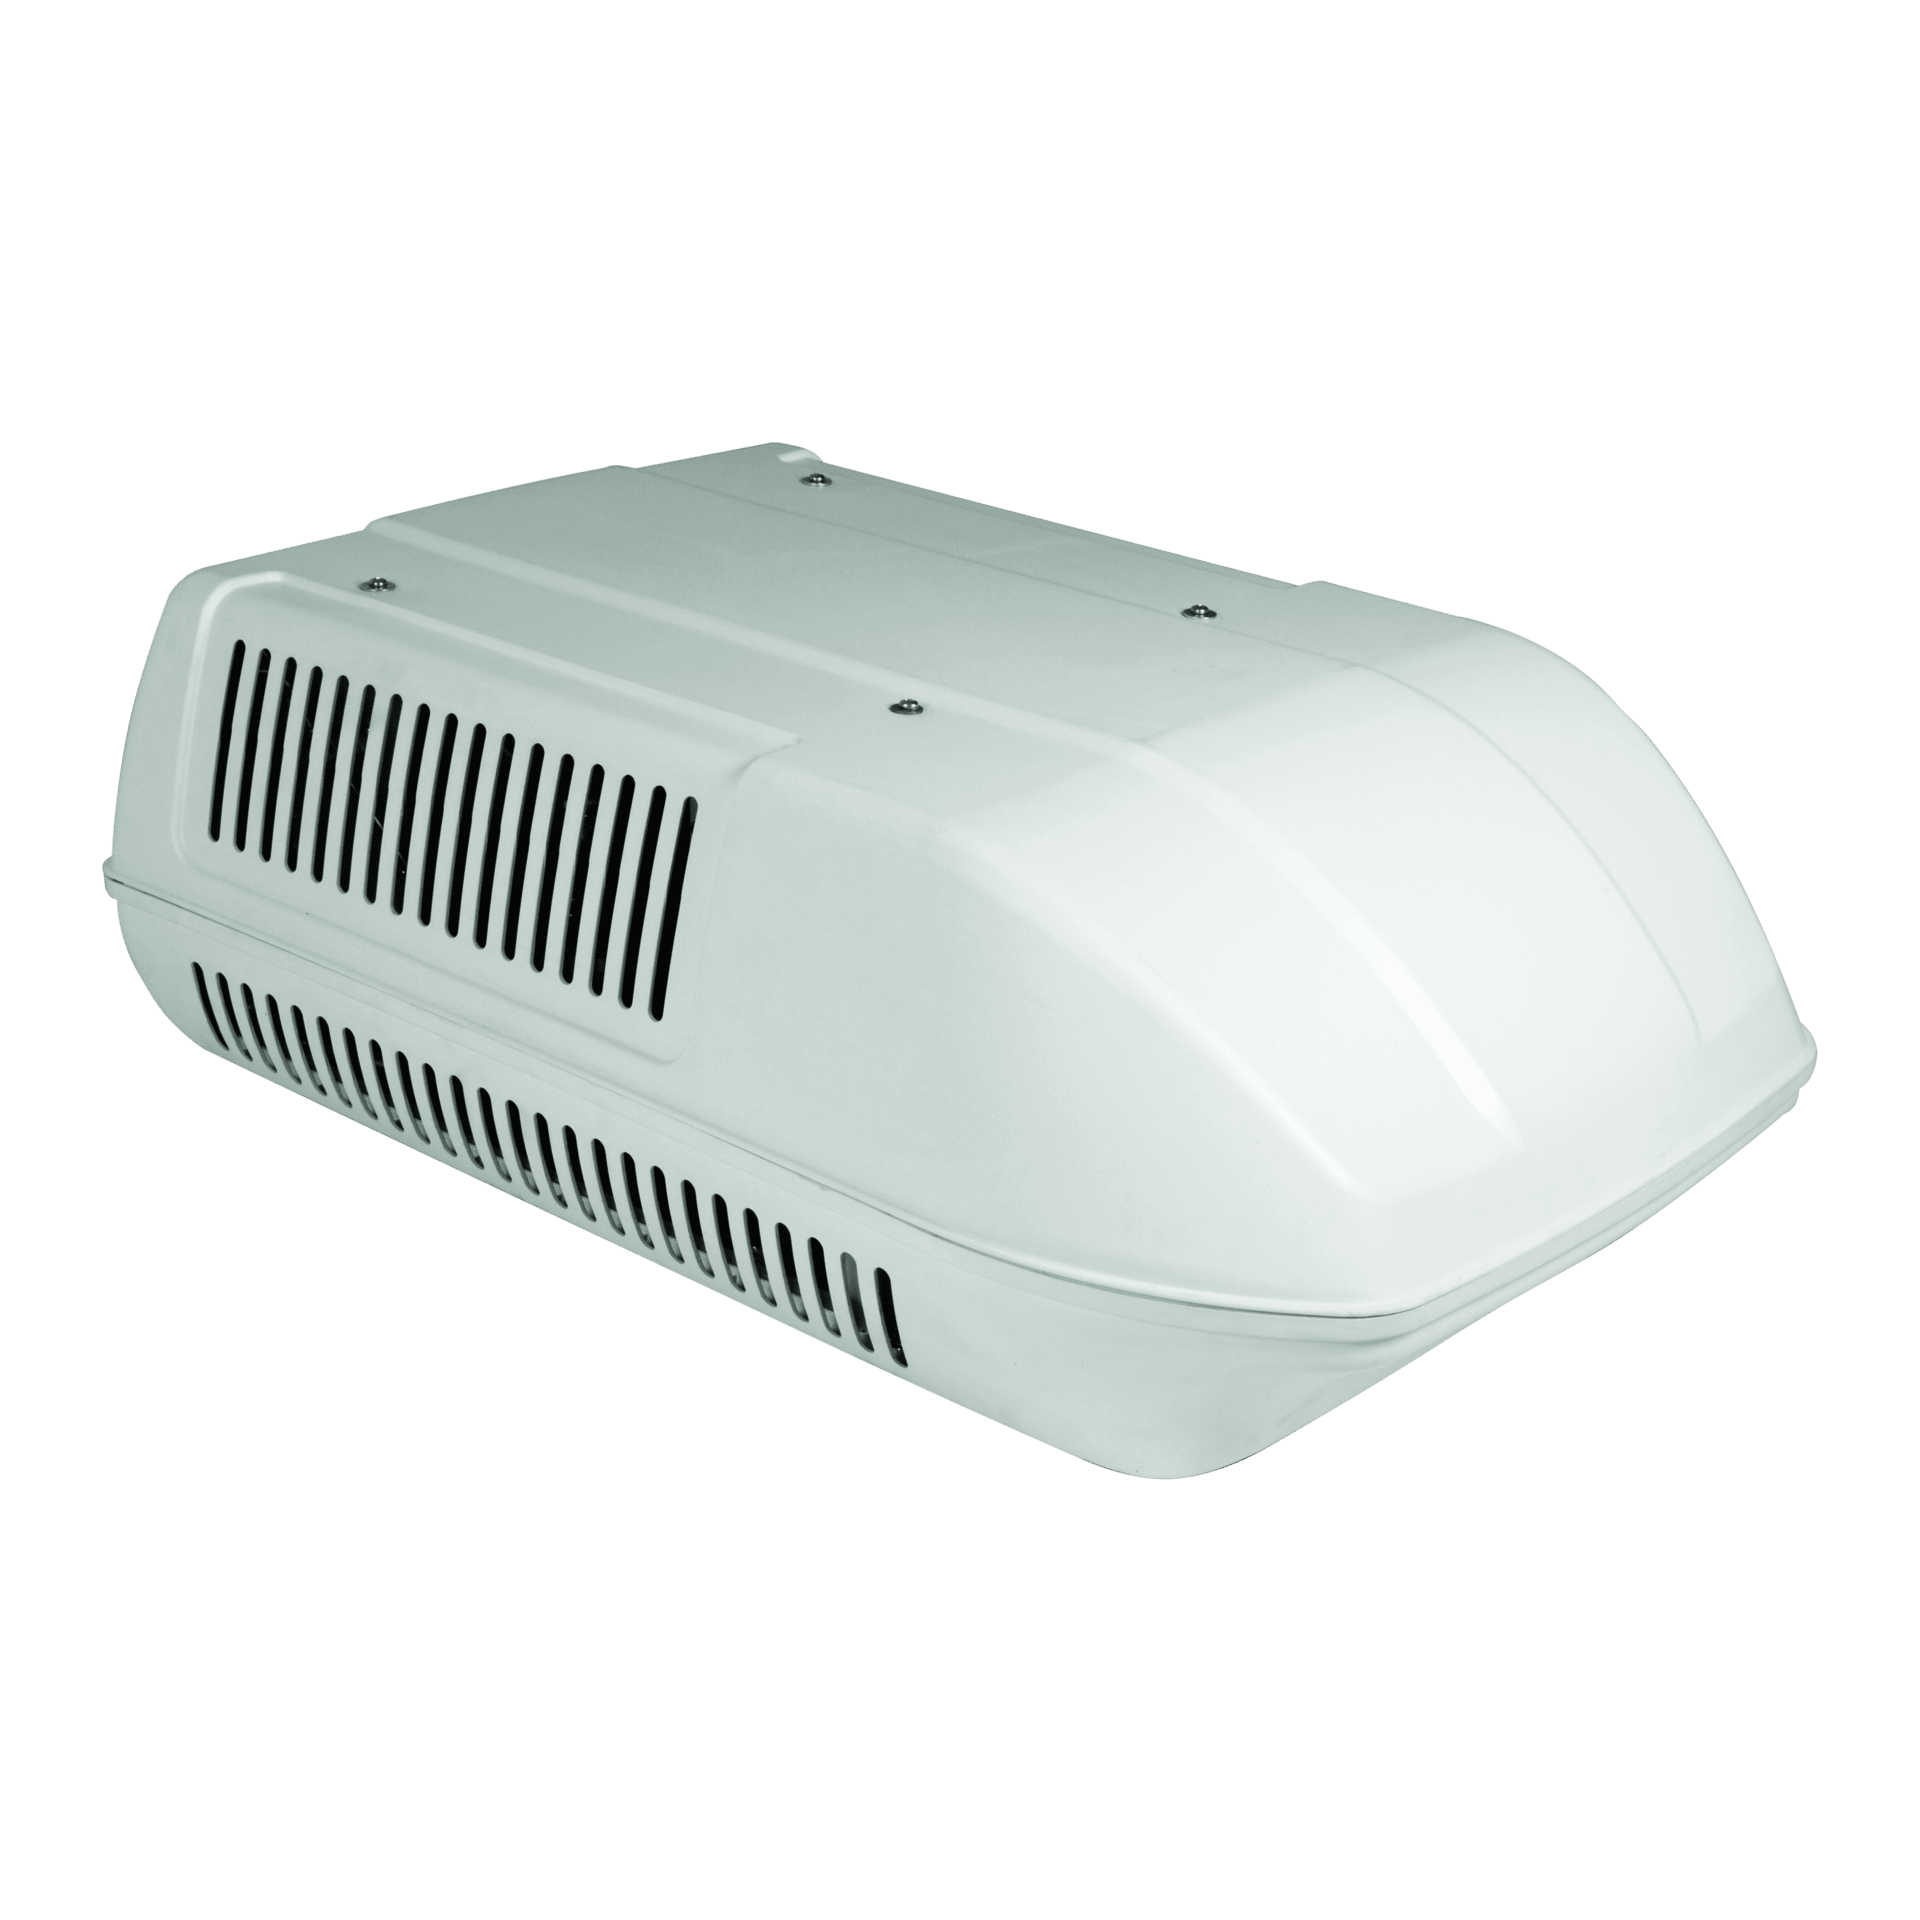 Dometic 15000 Btu Rv Air Conditioner Ducted